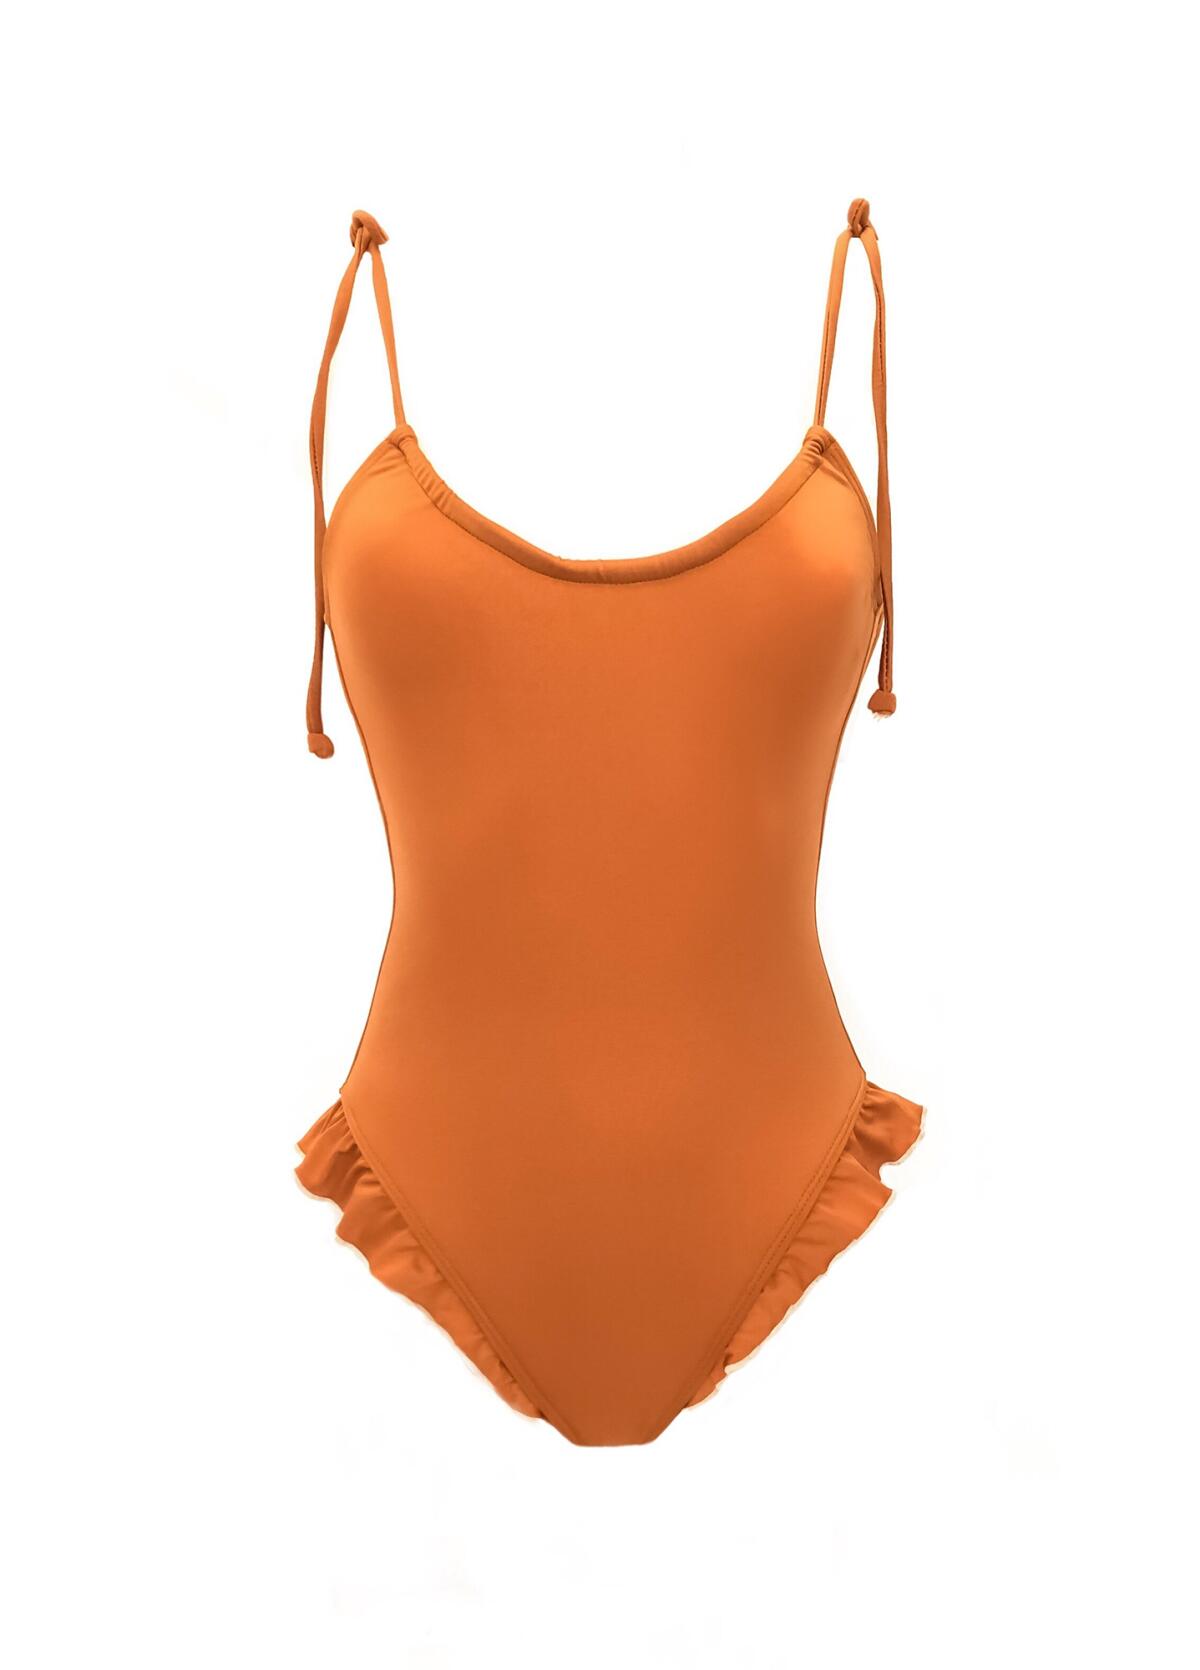 Castamira's Gia swimsuit in bleached copper